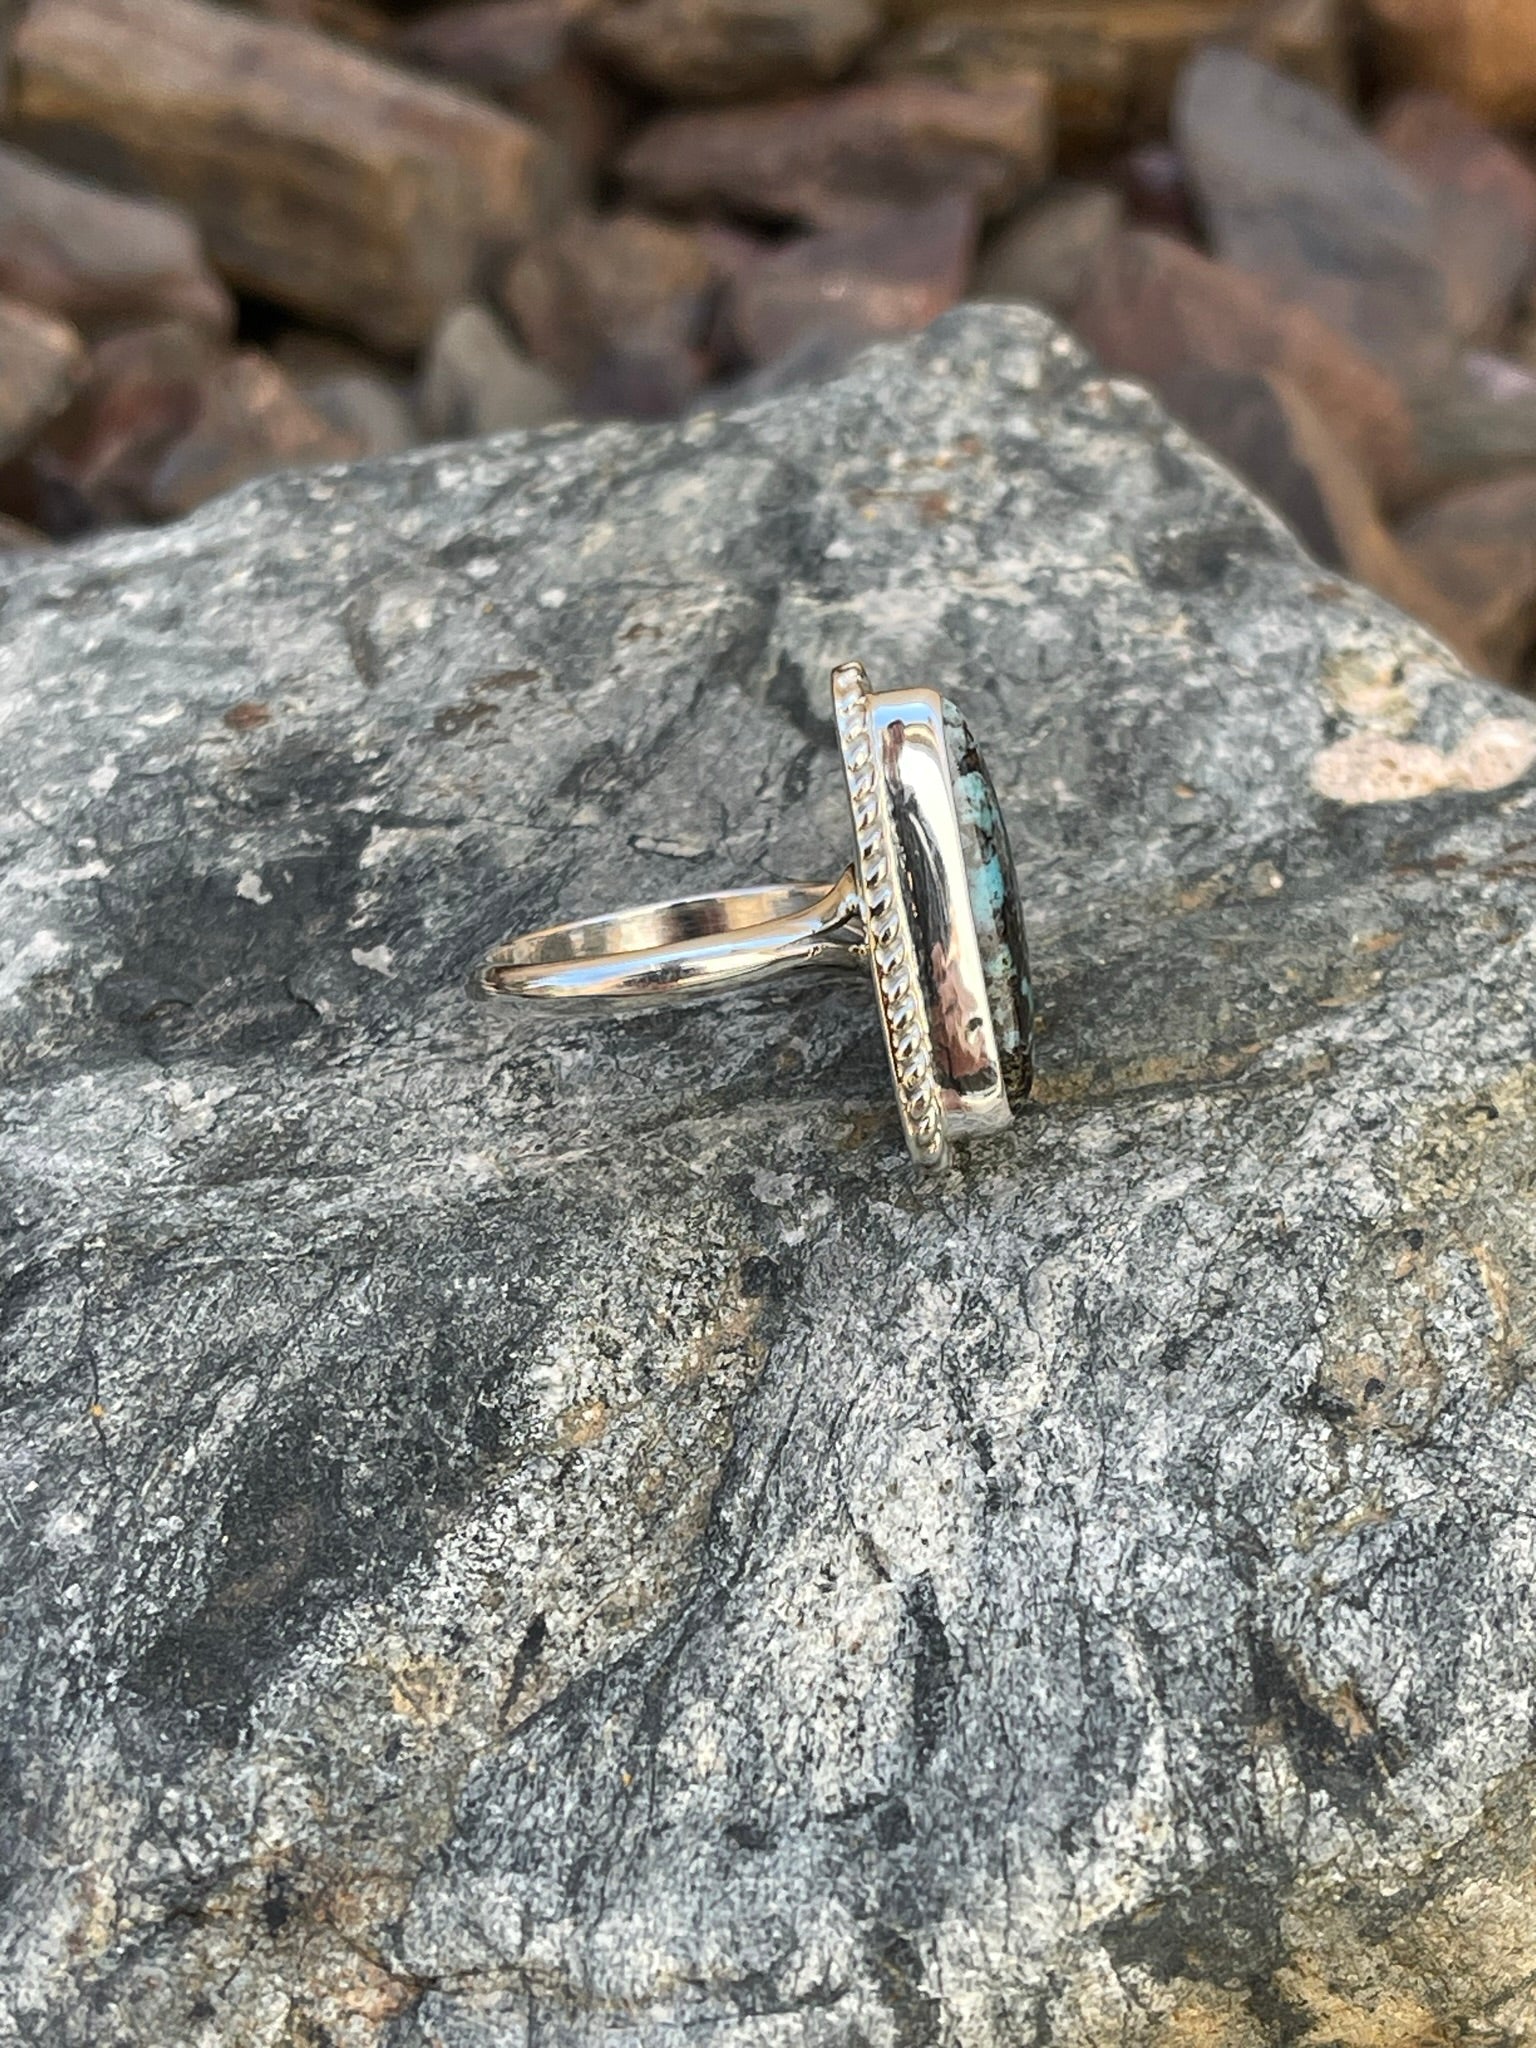 Handmade Sterling Silver Stormy Mountain Turquoise Ring with Twist Trim - Size 8